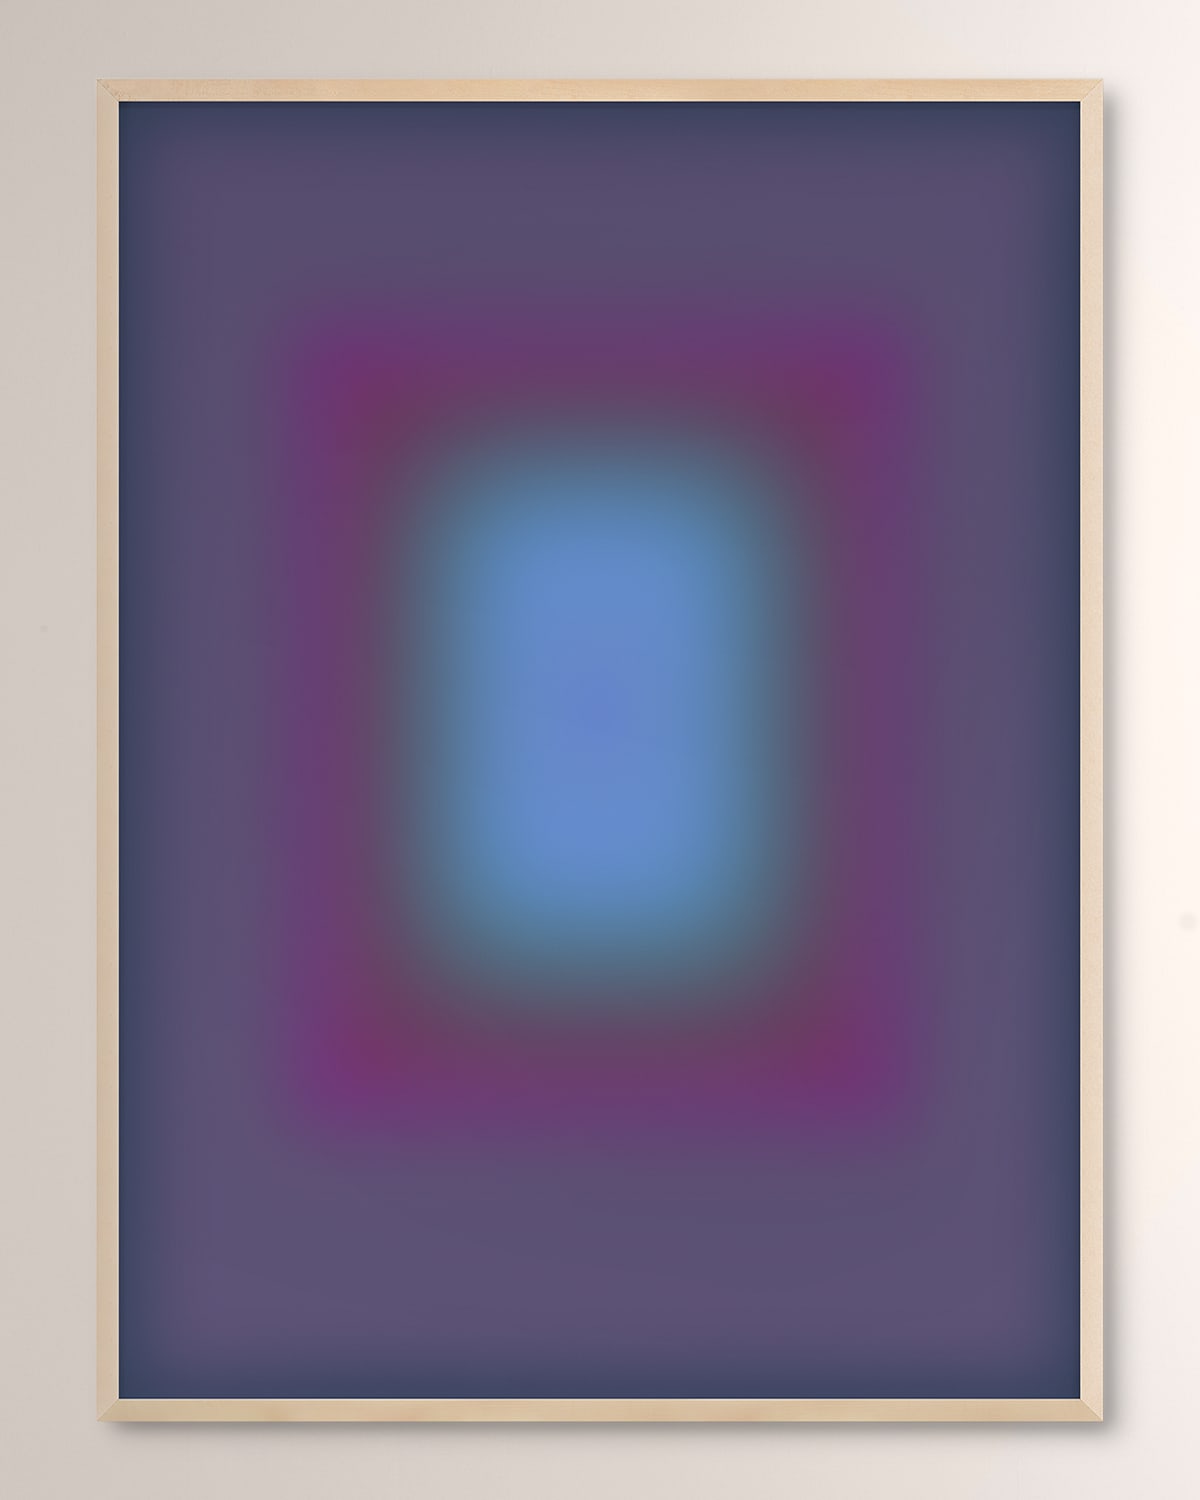 Shop Grand Image Home Blur 2 Giclee By Renee Stramel In Blue, Pink, Purple